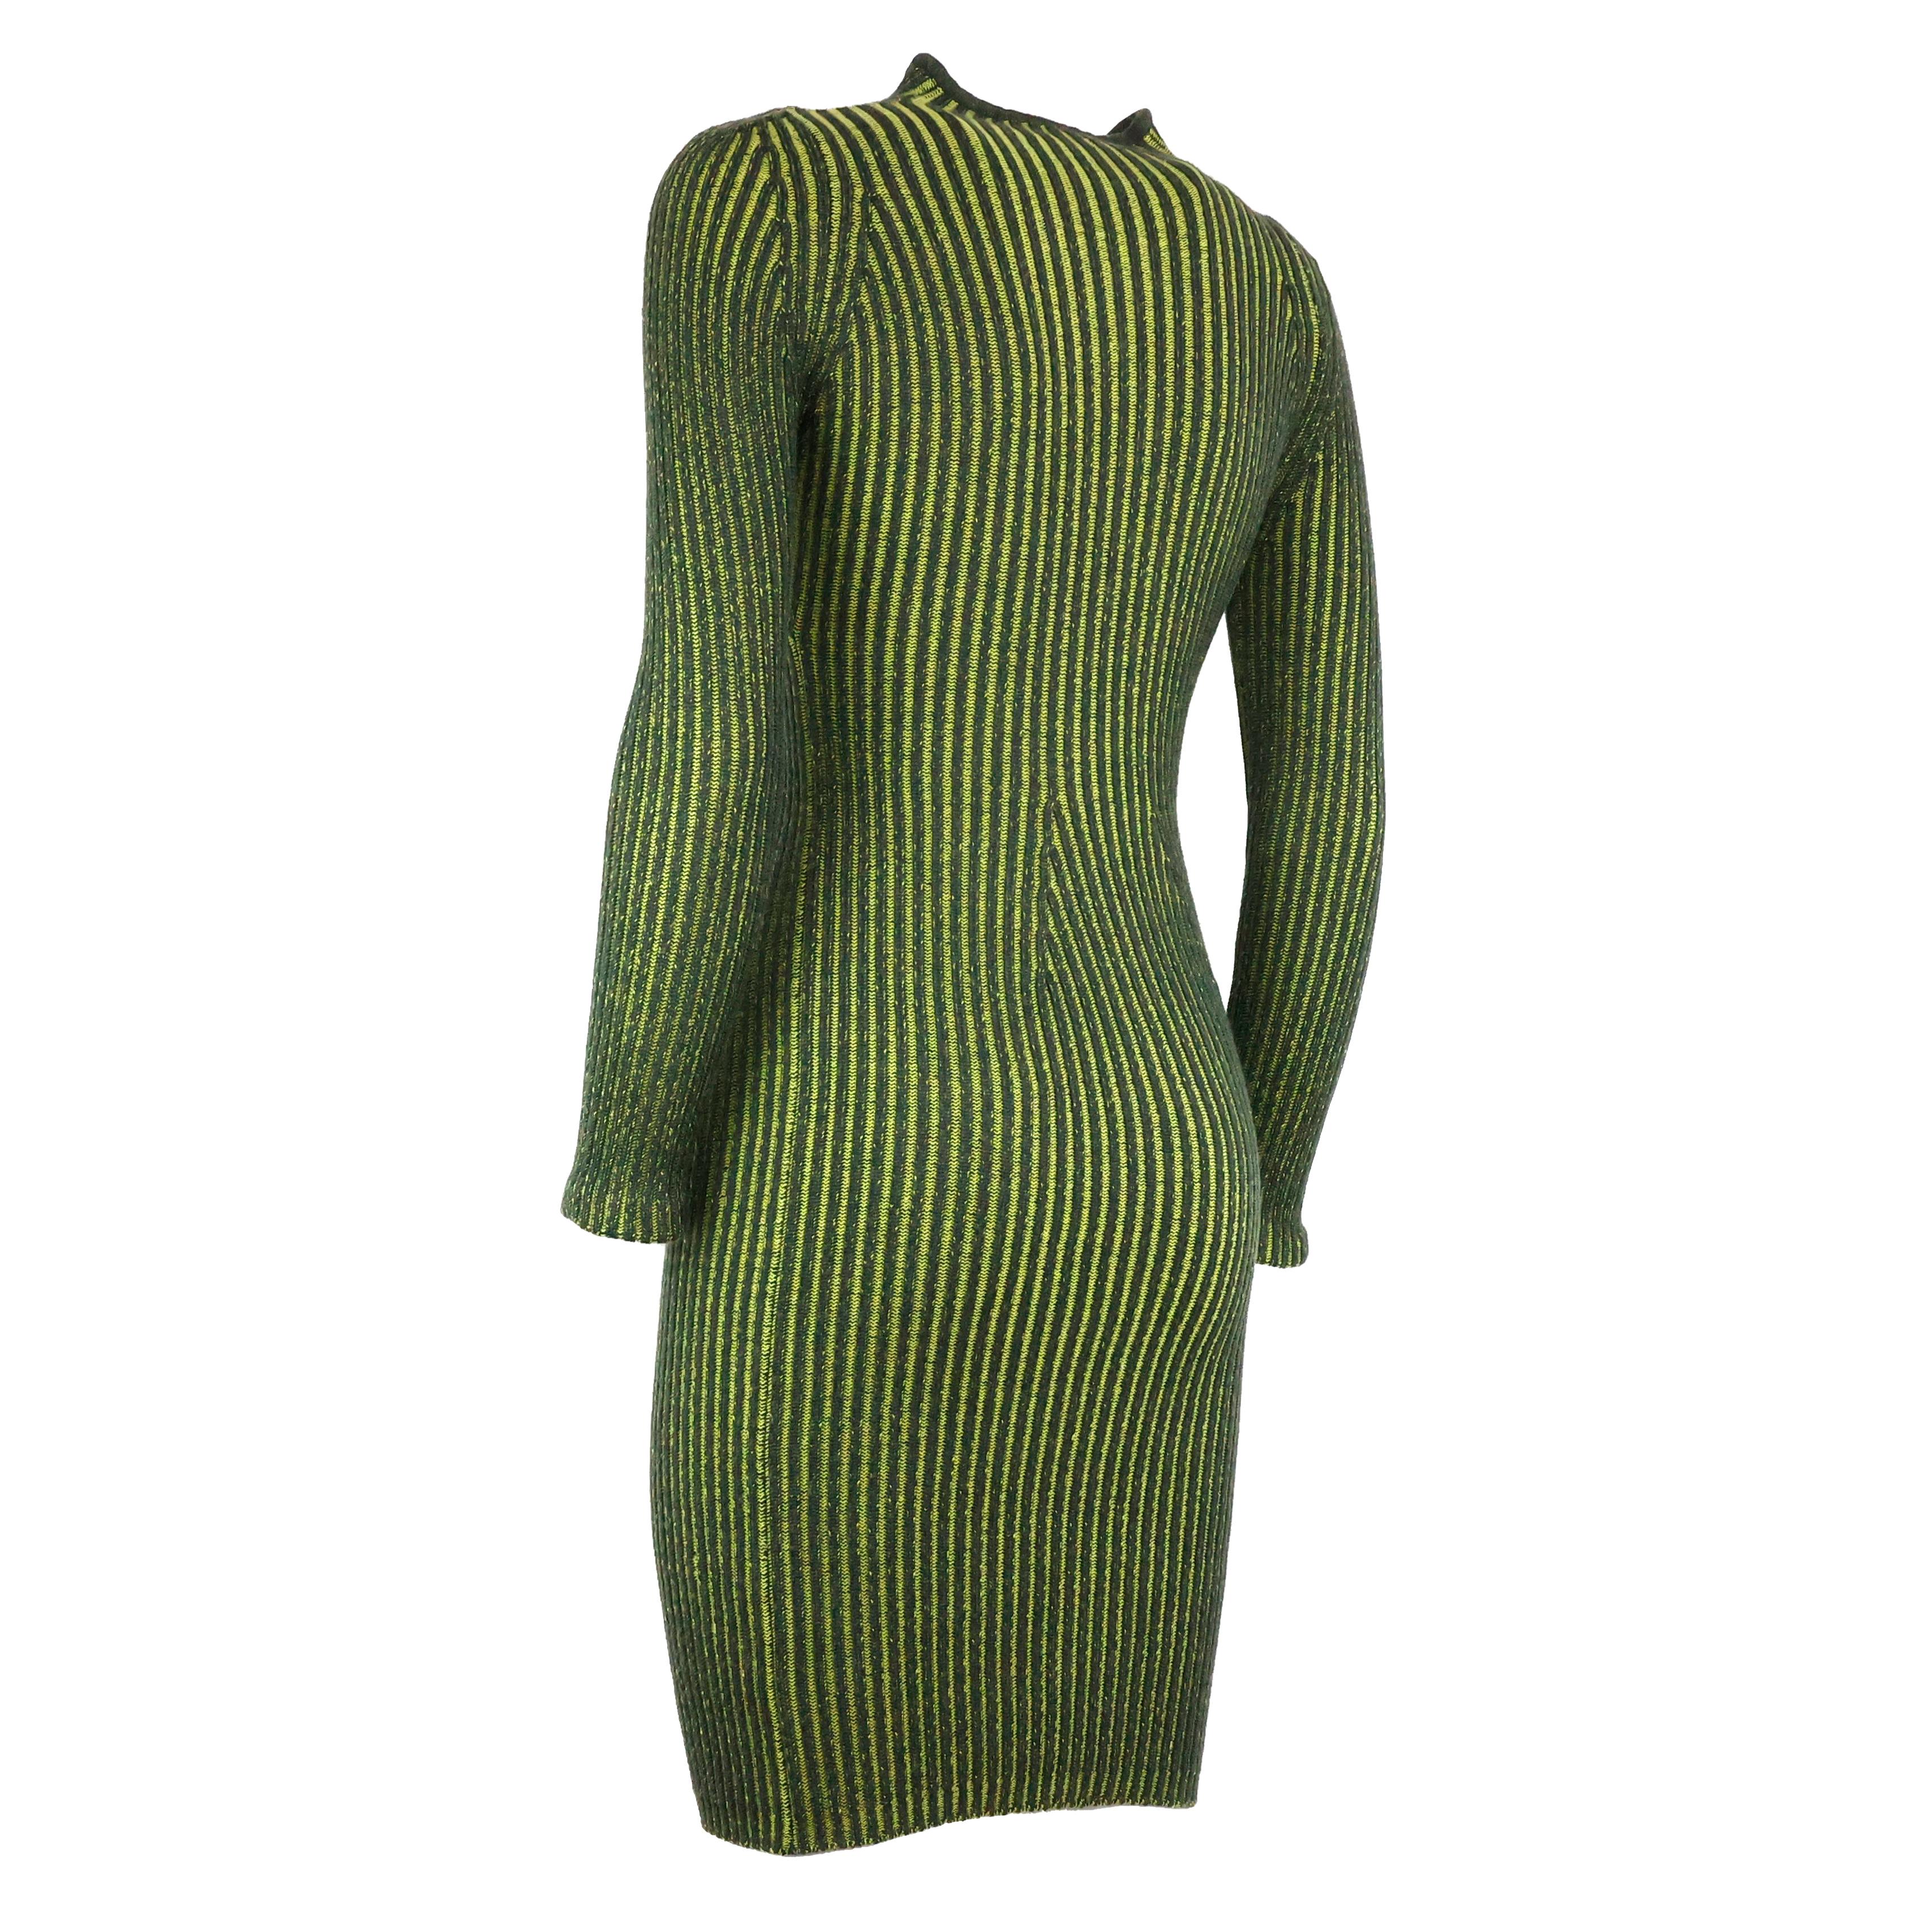 Mugler Stretch Dress in Wool In Excellent Condition For Sale In Bressanone, IT